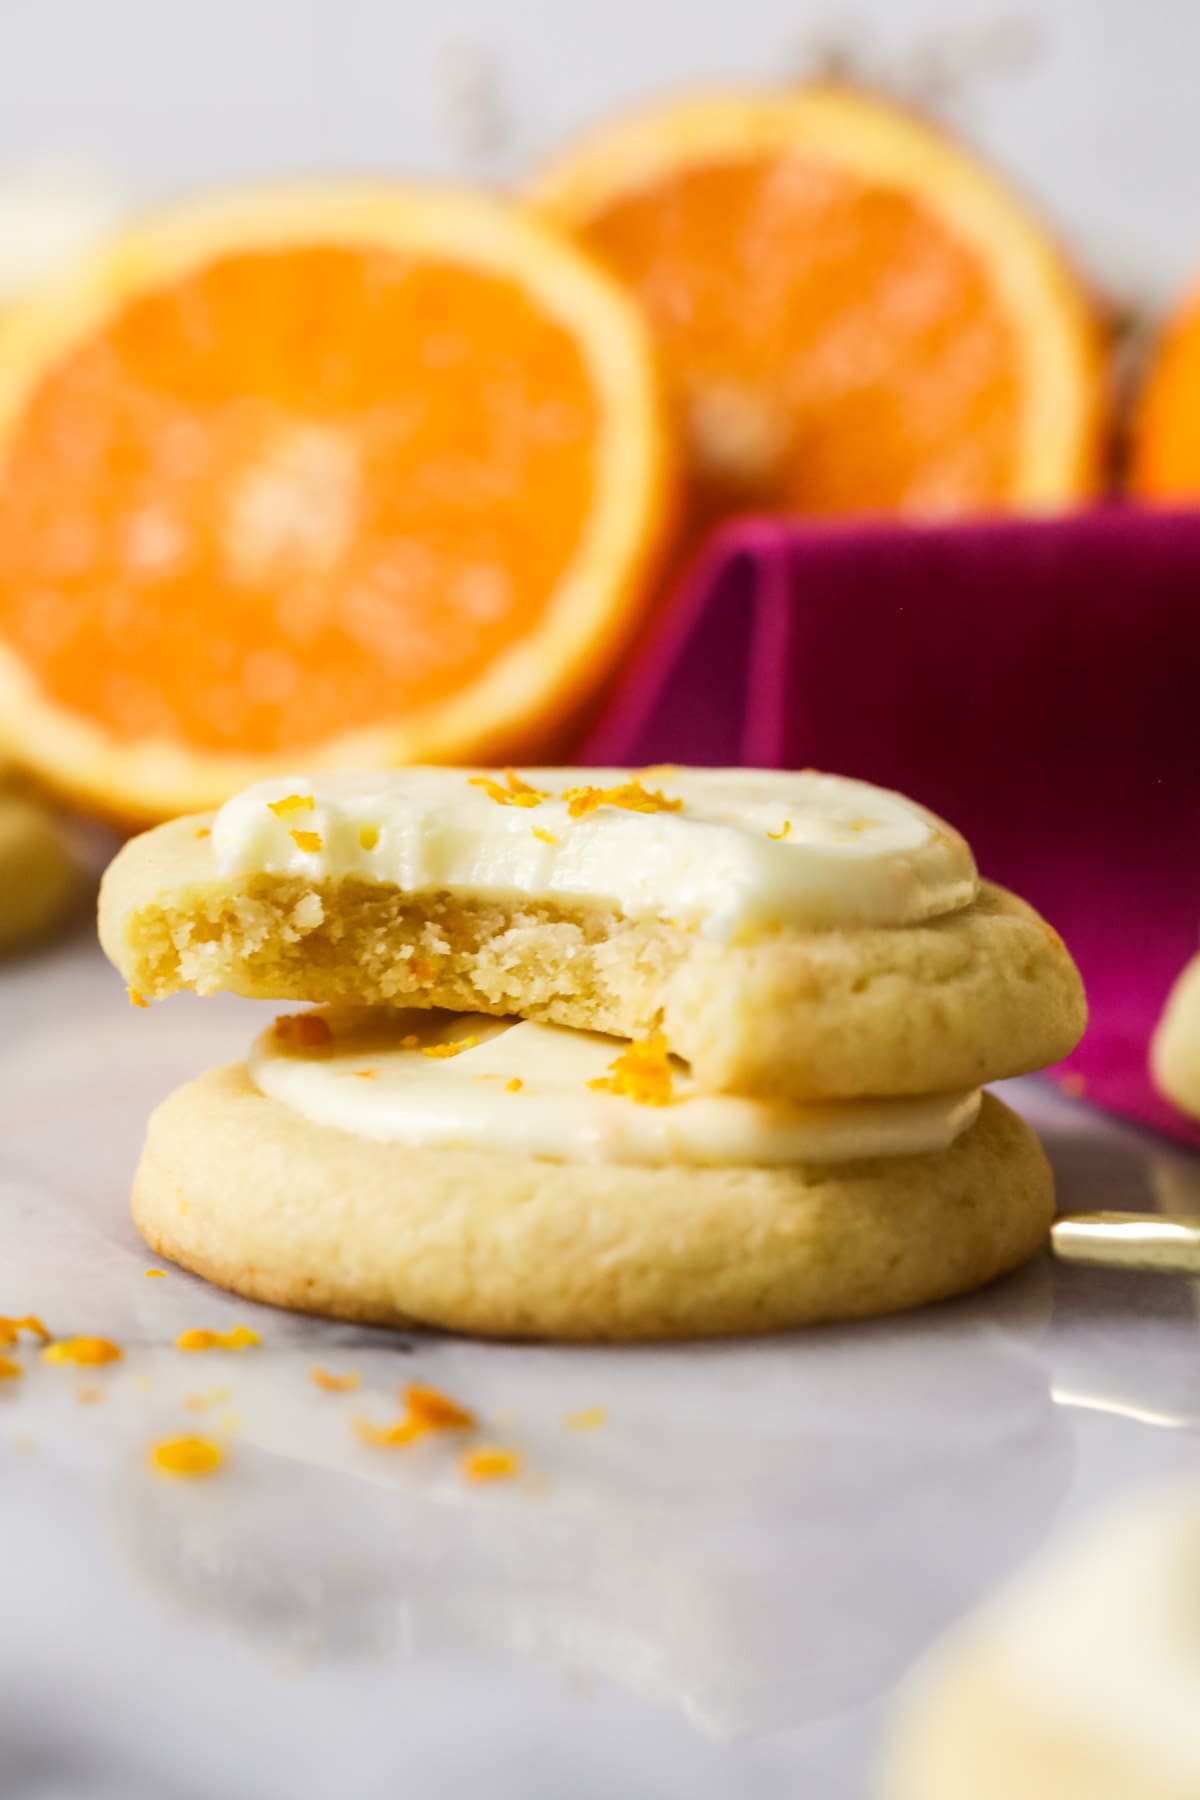 Two orange cookies stacked on top of each other with the top cookie missing one bite.